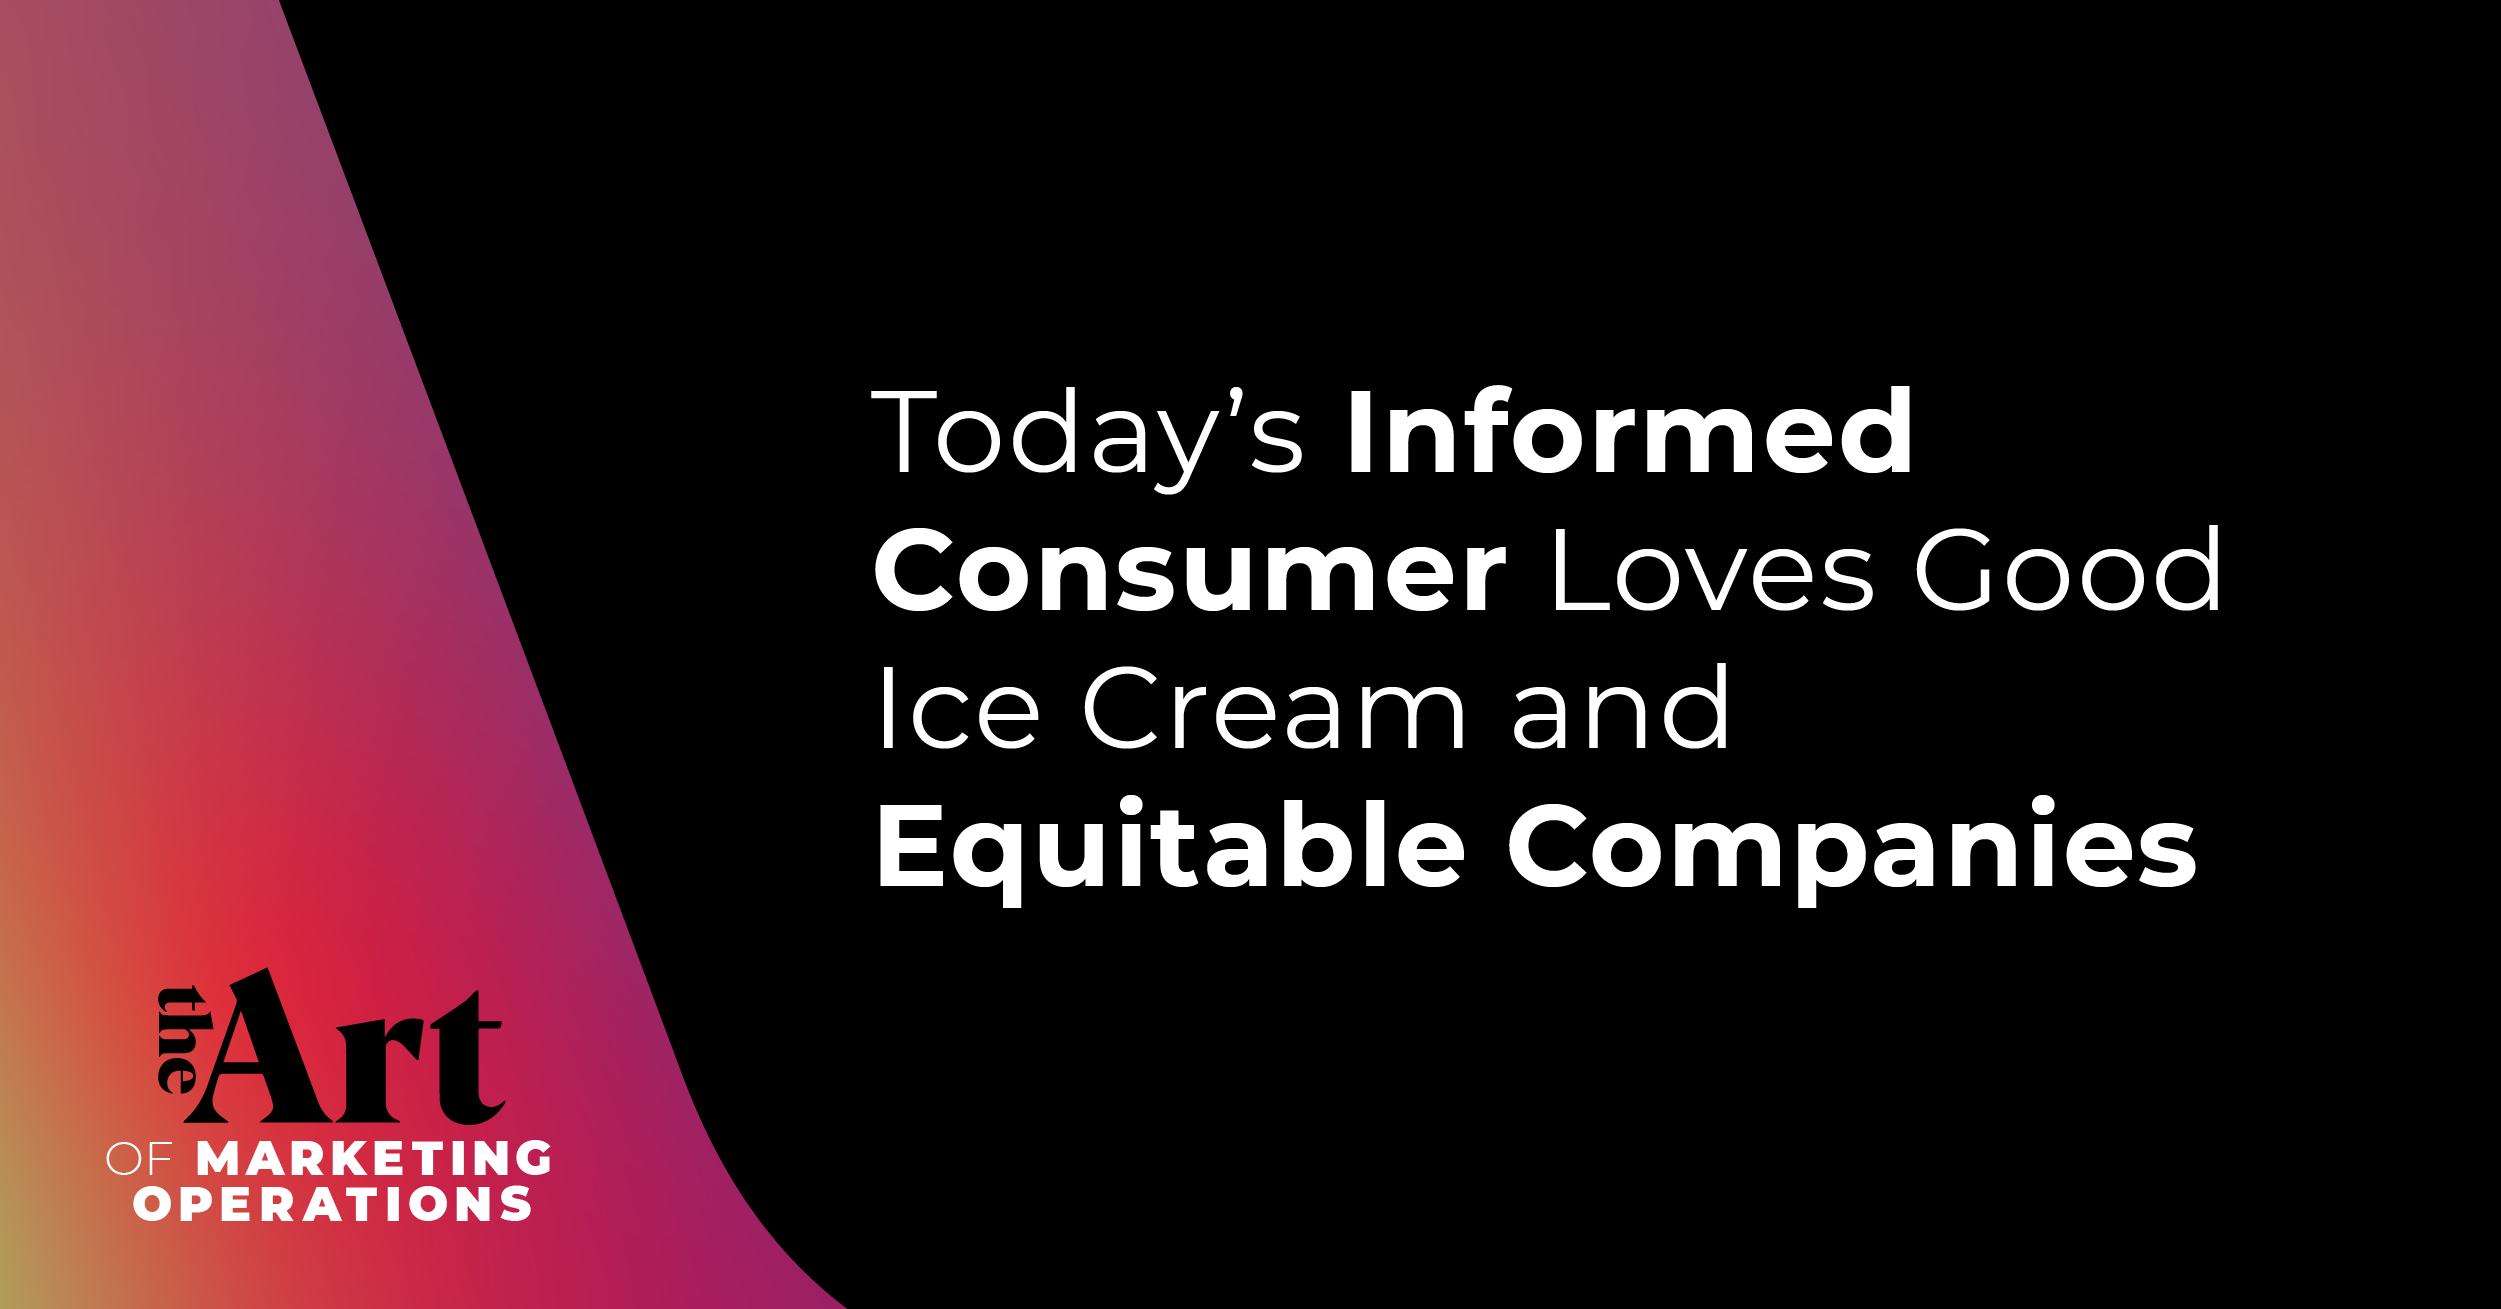 Featured image for article: Ep: 23 - Today’s Informed Consumer Loves Good Ice Cream and Equitable Companies